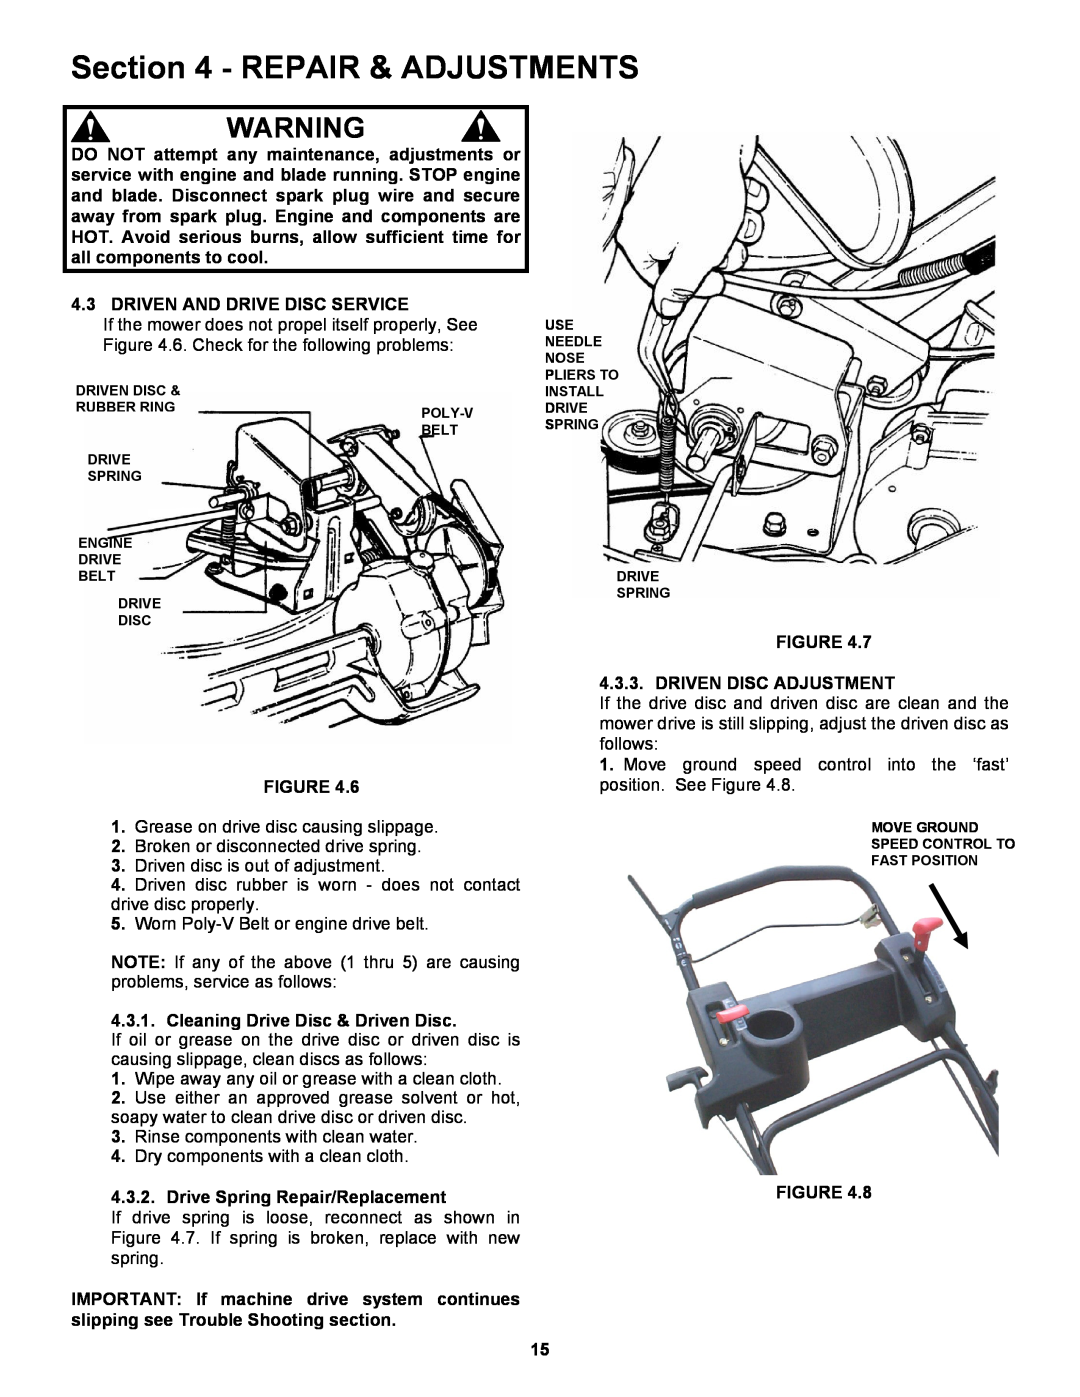 Snapper EP217019BV important safety instructions Repair & Adjustments, Grease on drive disc causing slippage 